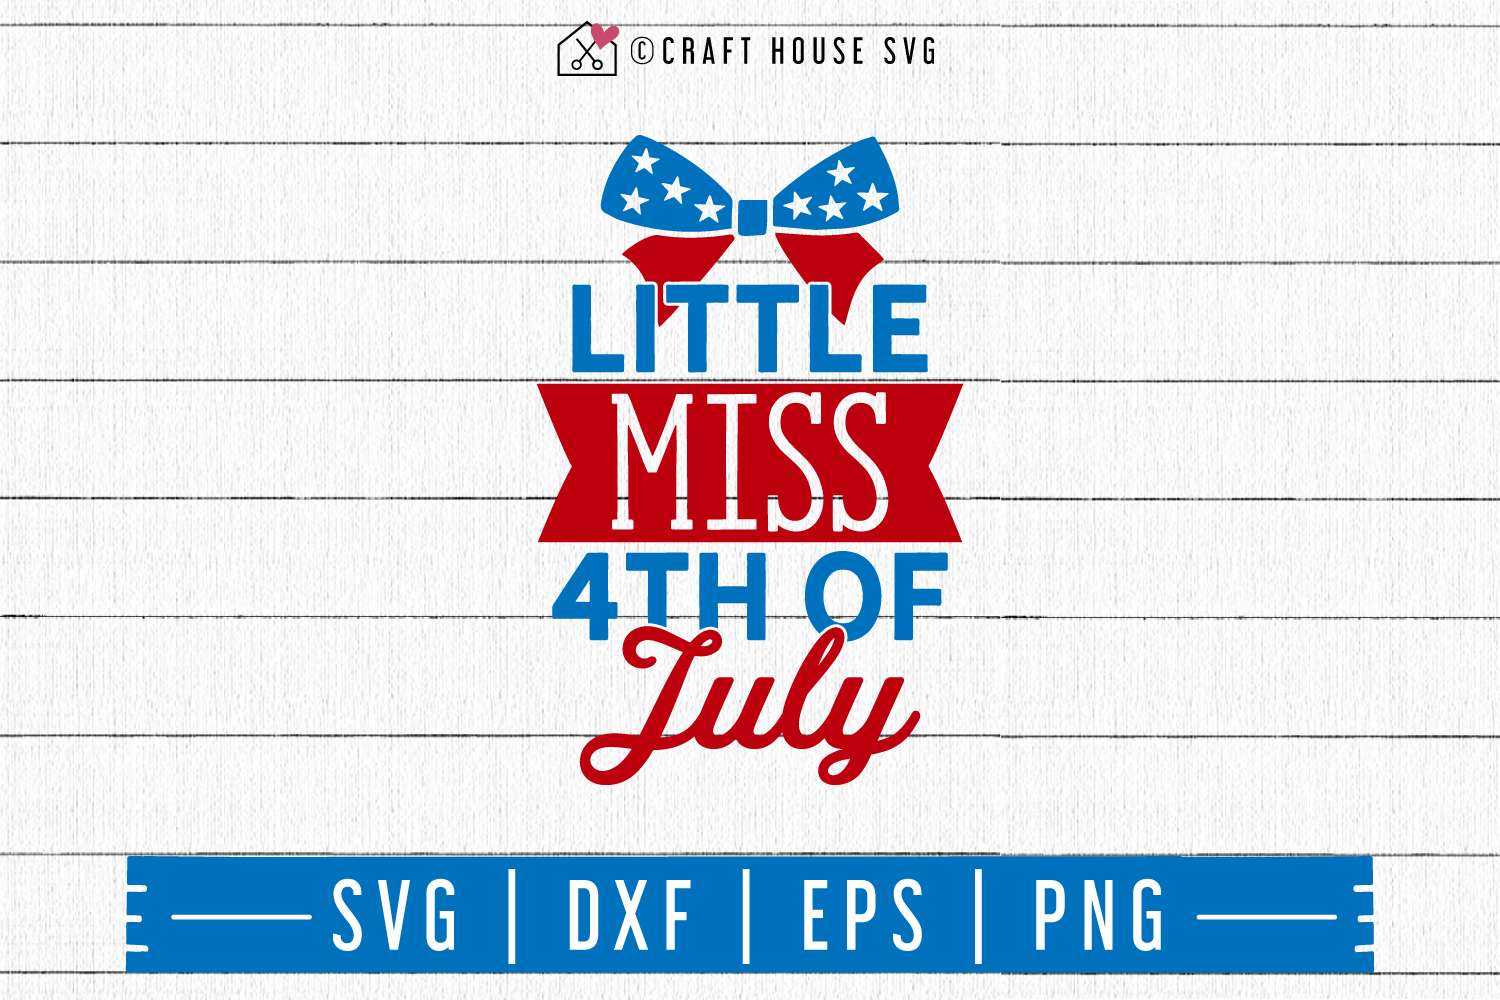 4th of July SVG file | Little miss 4th of July SVG Craft House SVG - SVG files for Cricut and Silhouette